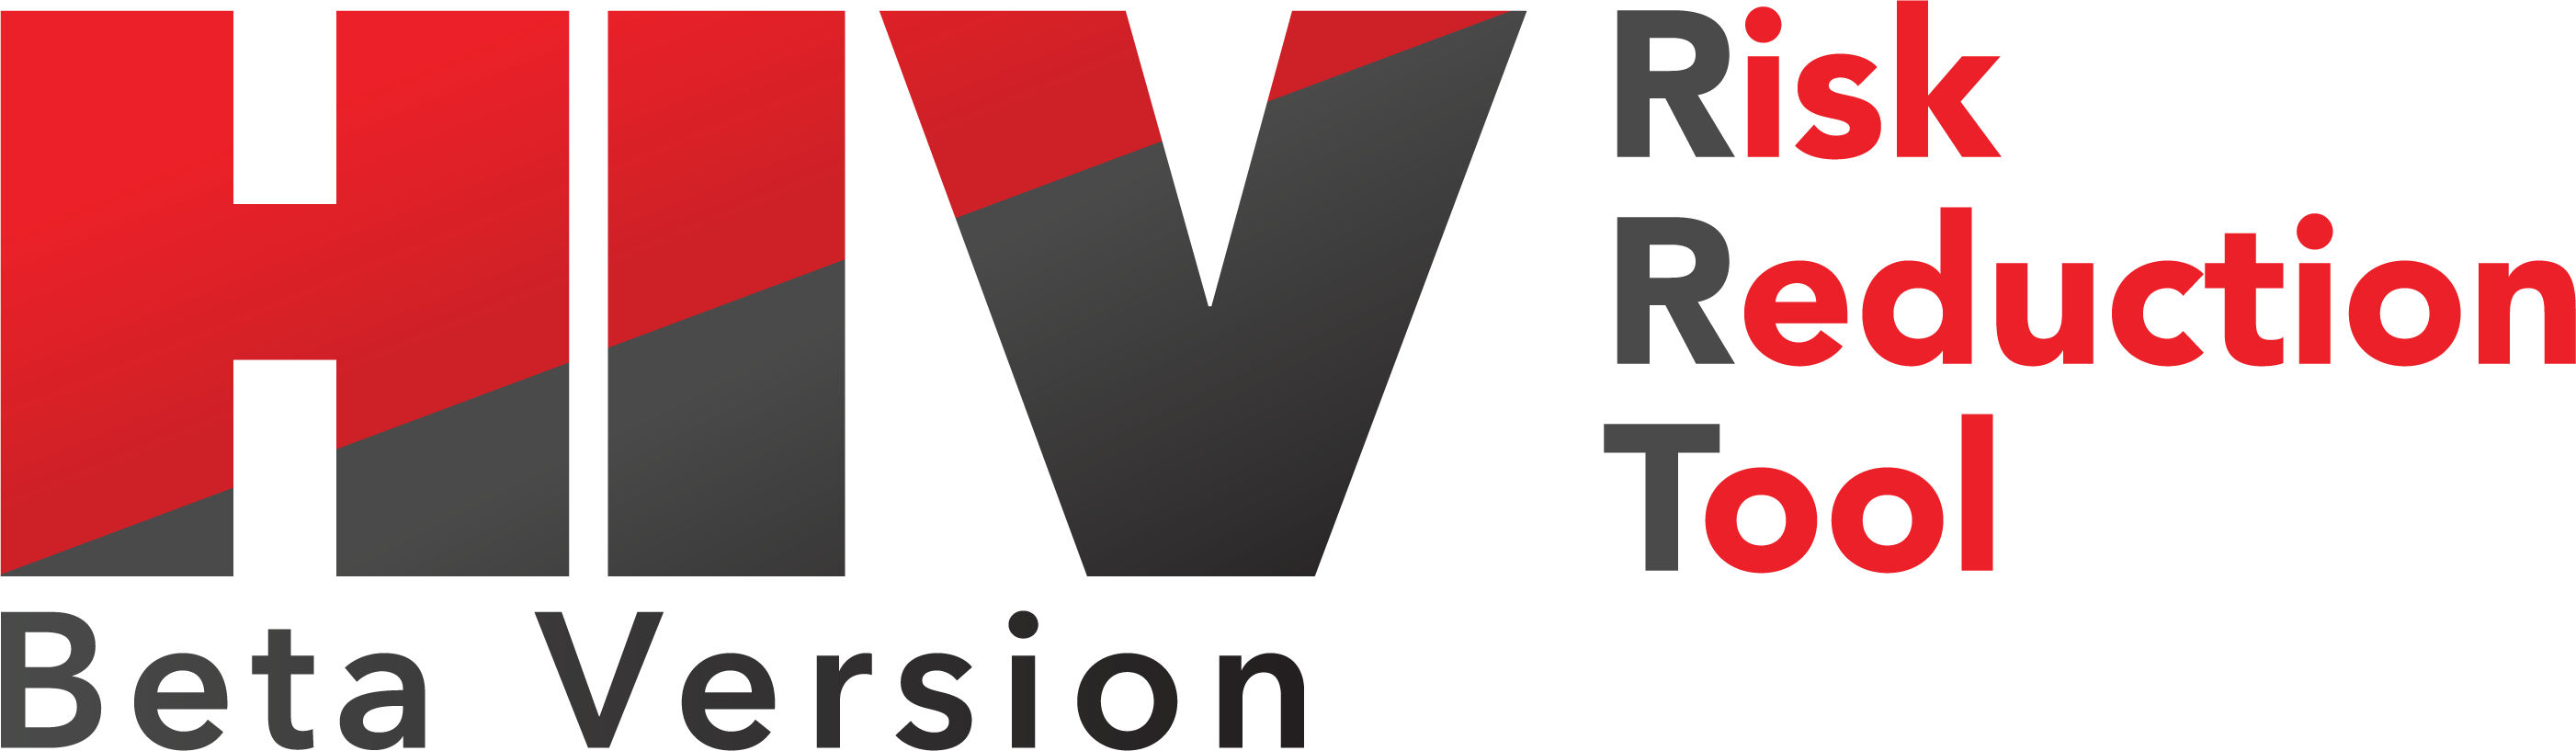 Logo for HIV Risk Reduction Tool